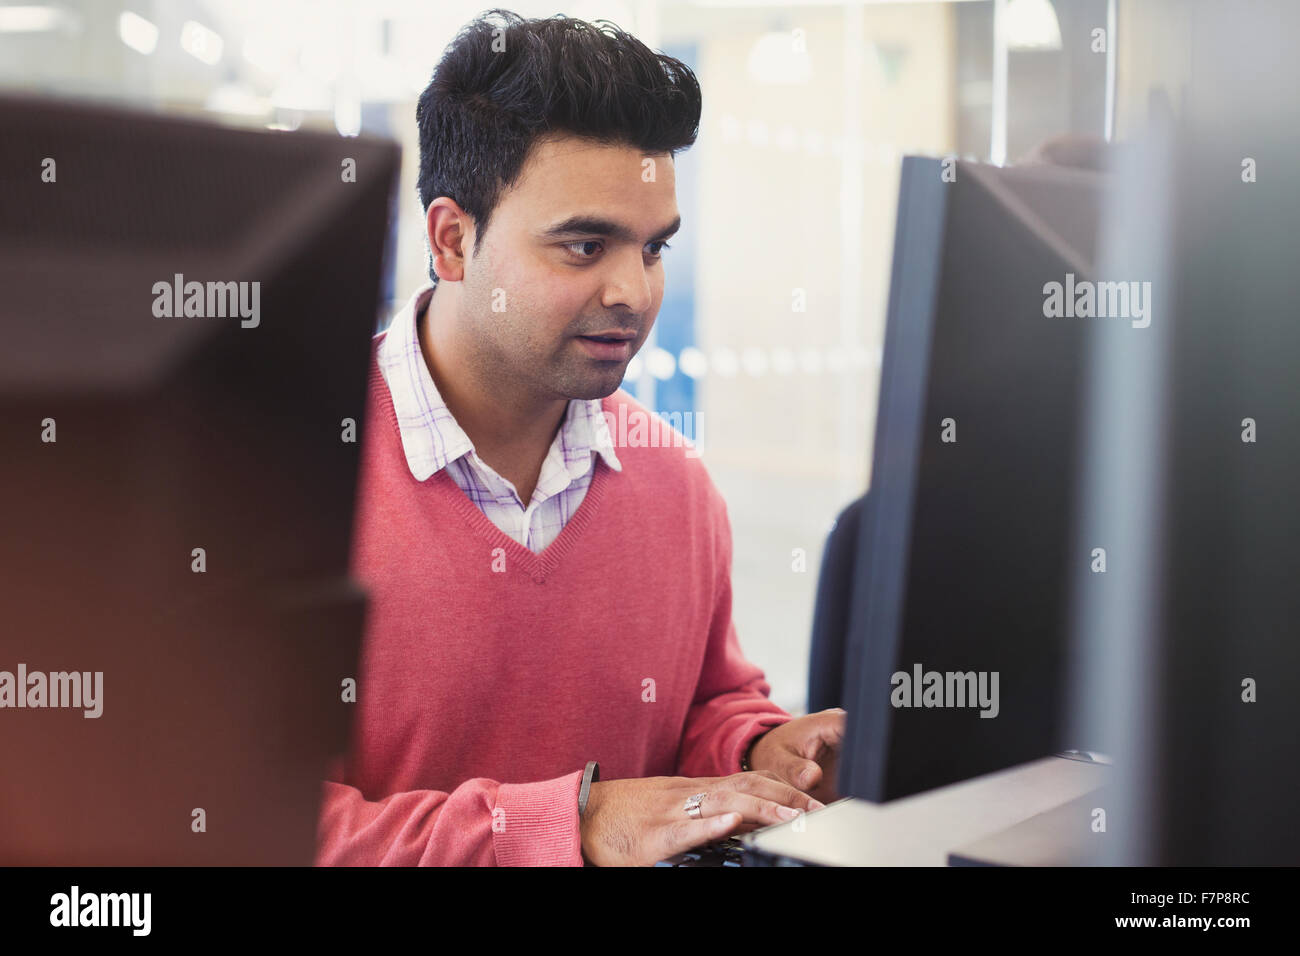 Man typing at computer in adult education classroom Stock Photo